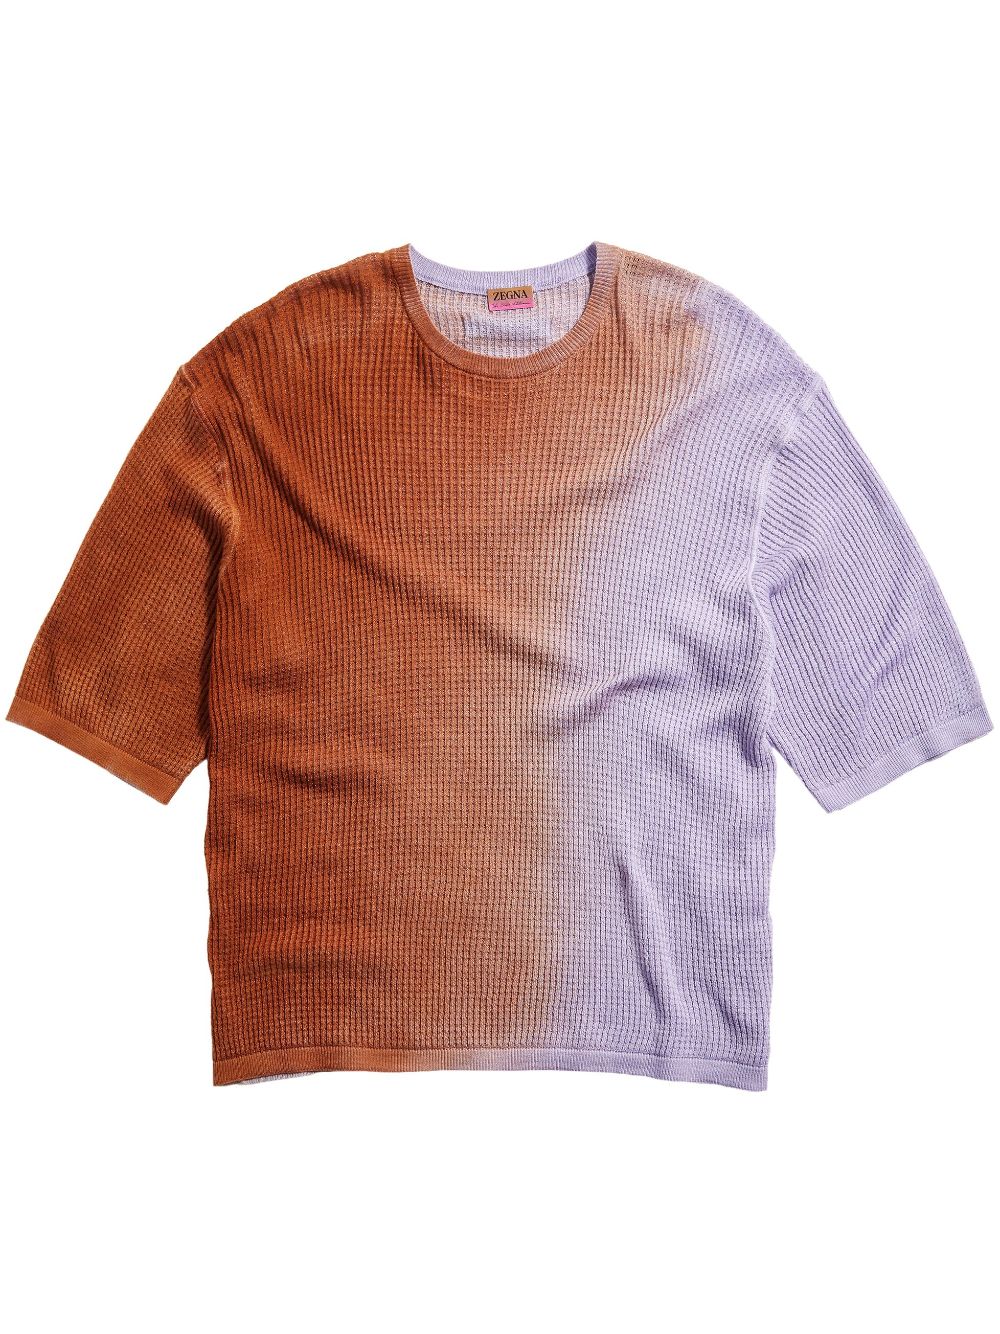 Zegna Three Quarter-sleeves Knitted Top In Purple